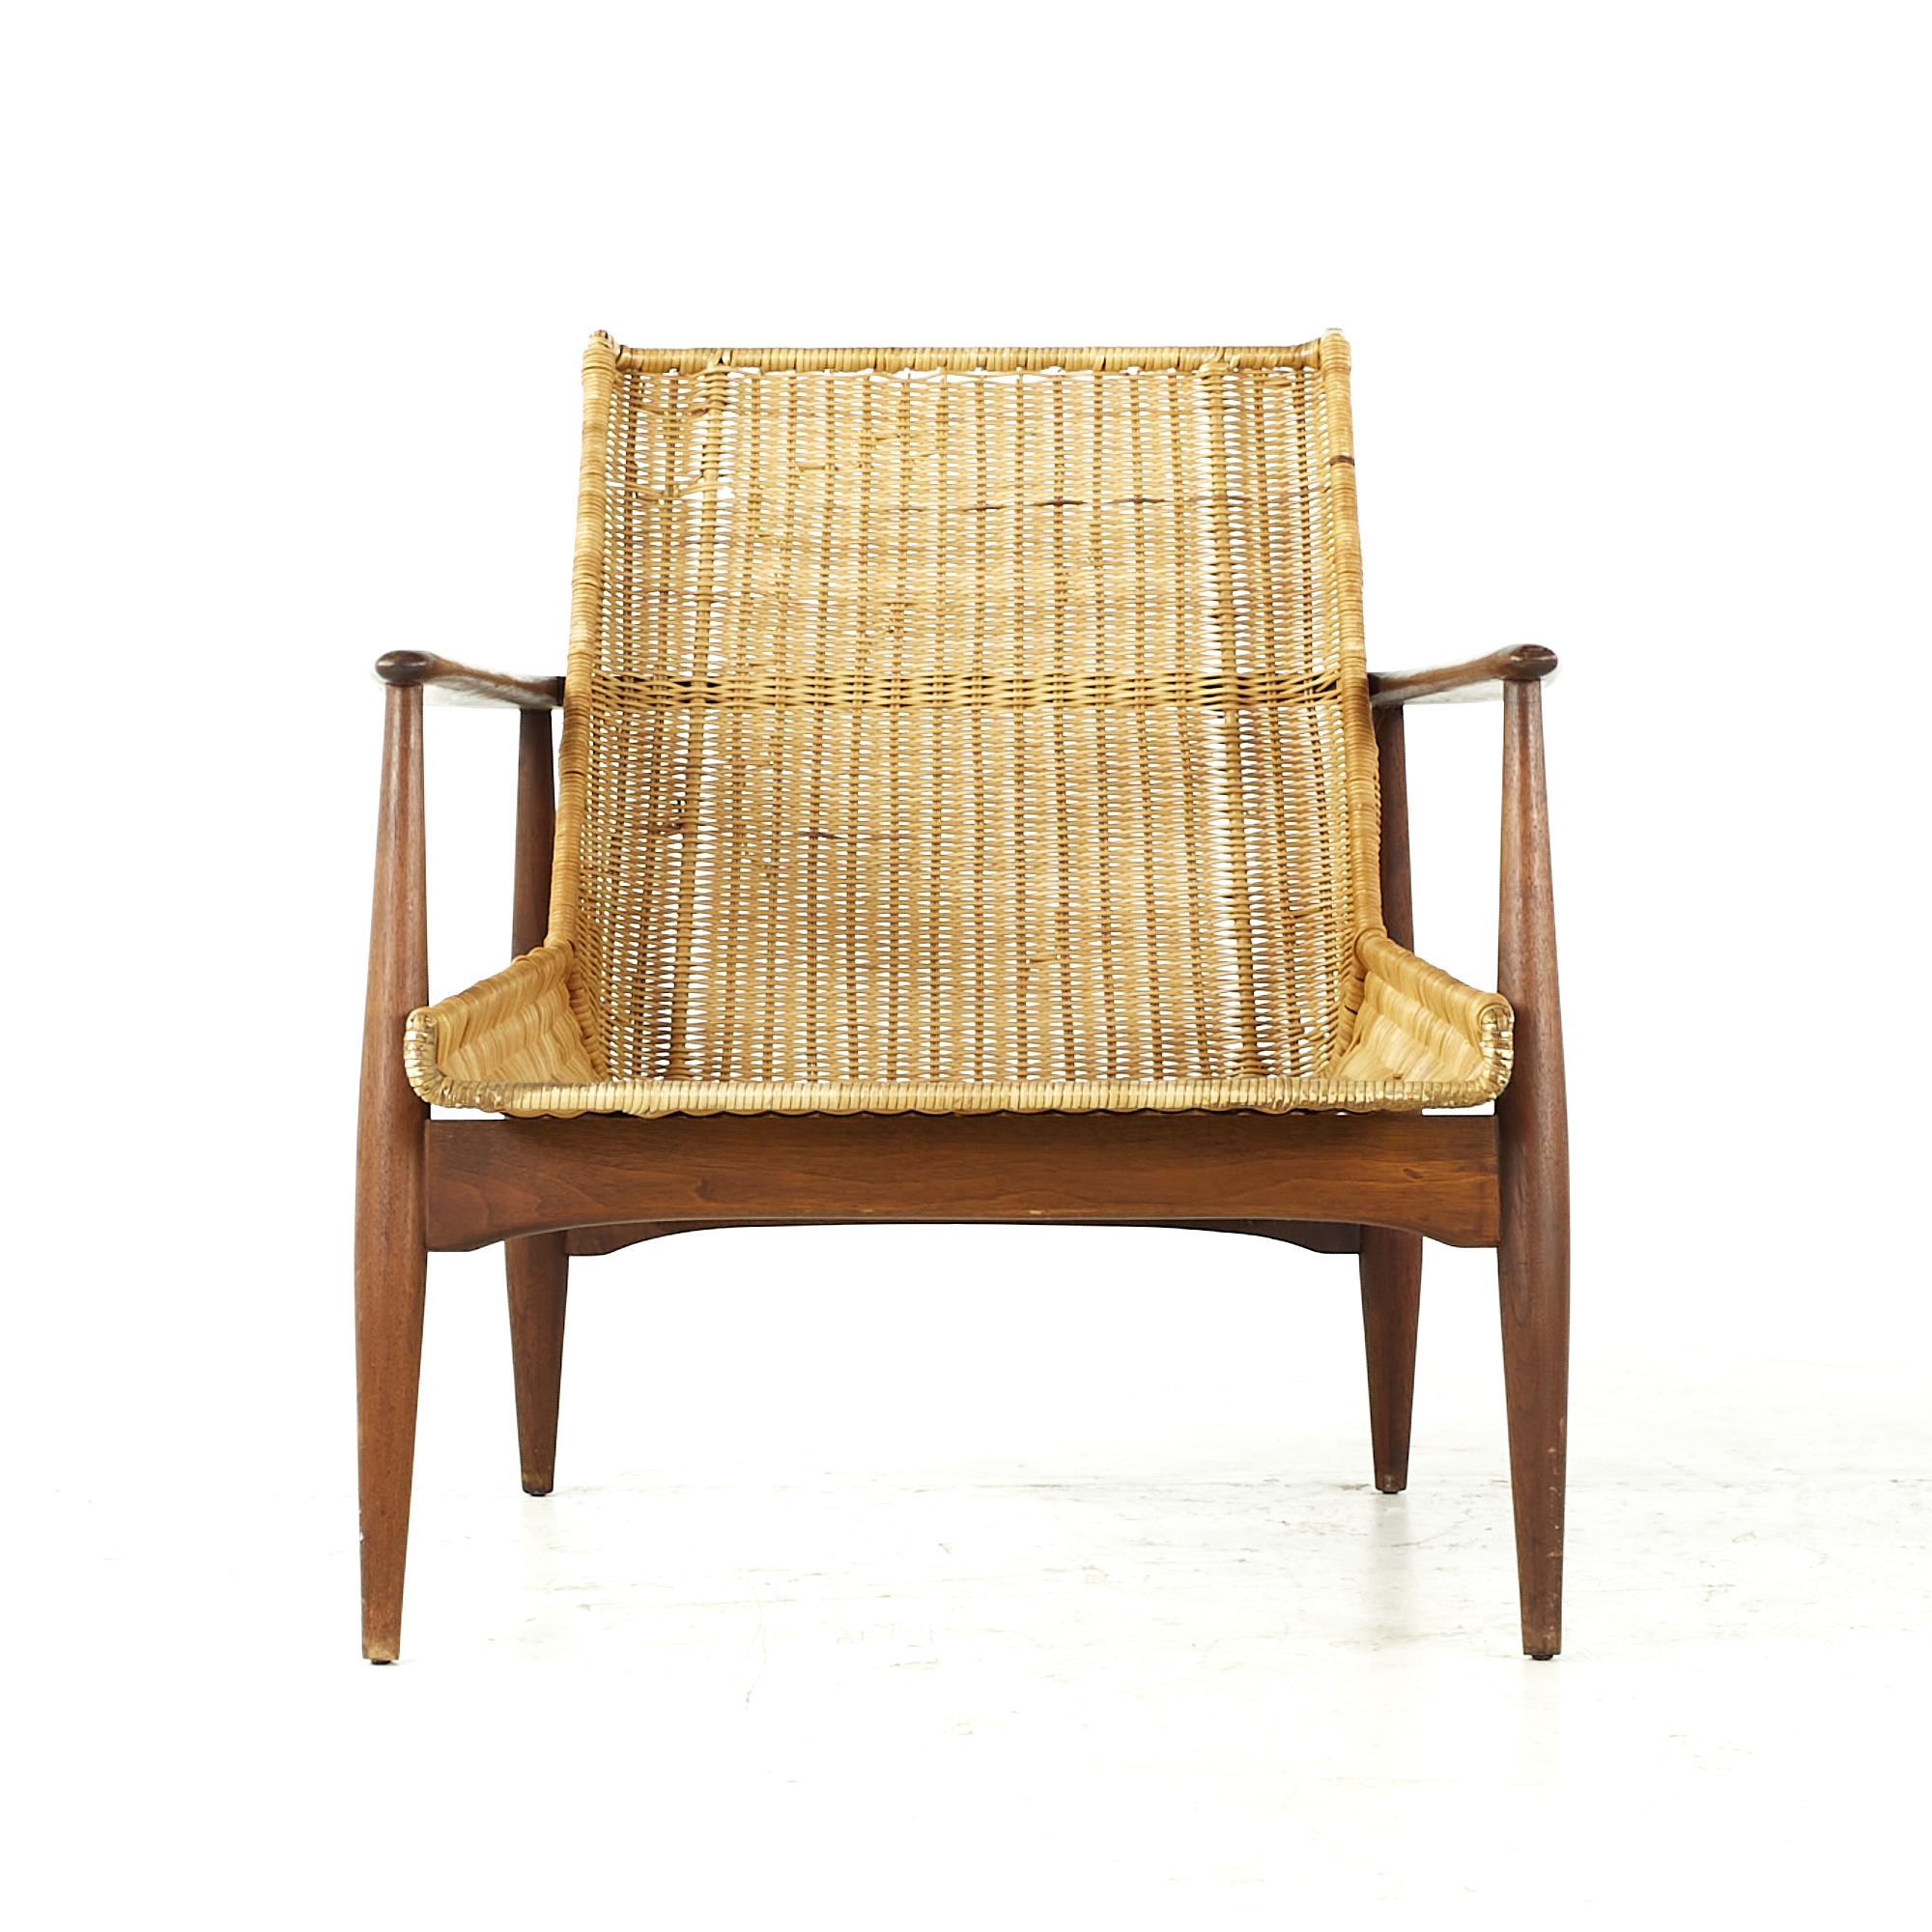 Lawrence Peabody for Richardson Nemschoff midcentury cane lounge chair

This chair measures: 28.5 wide x 30 deep x 30 inches high, with a seat height of 13 and arm height/chair clearance of 22 inches

All pieces of furniture can be had in what